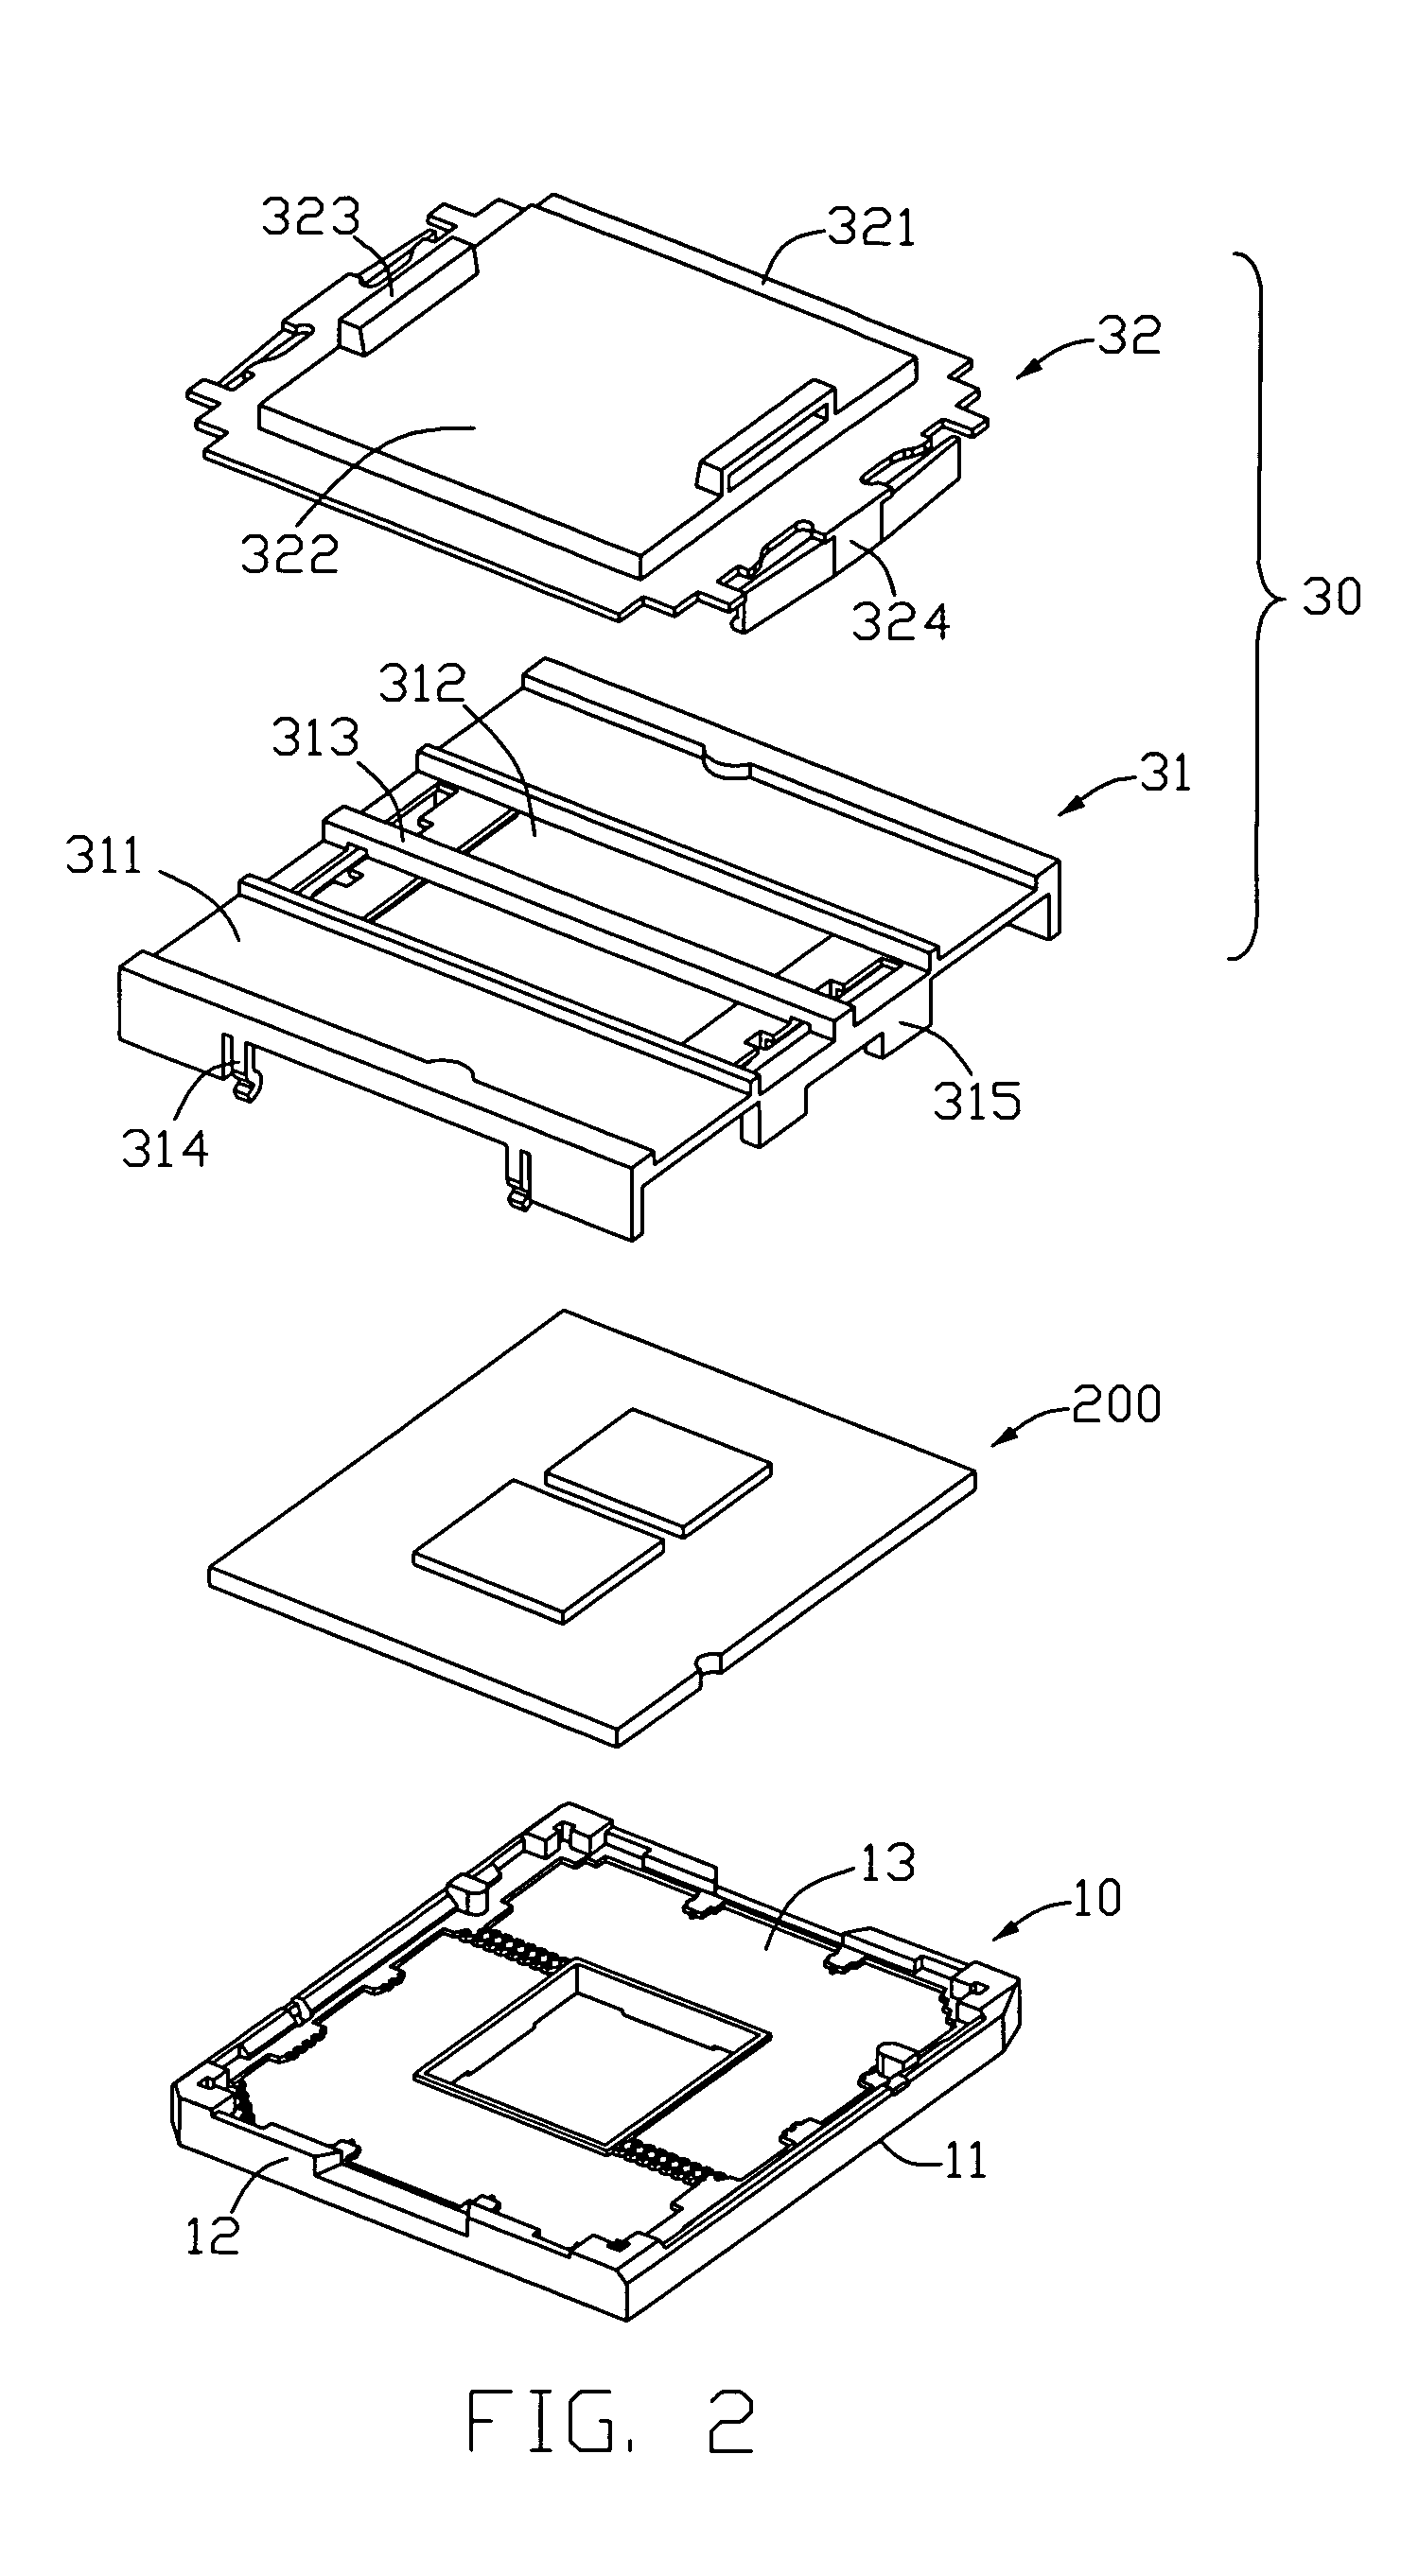 CPU socket assembly with package retention mechanism